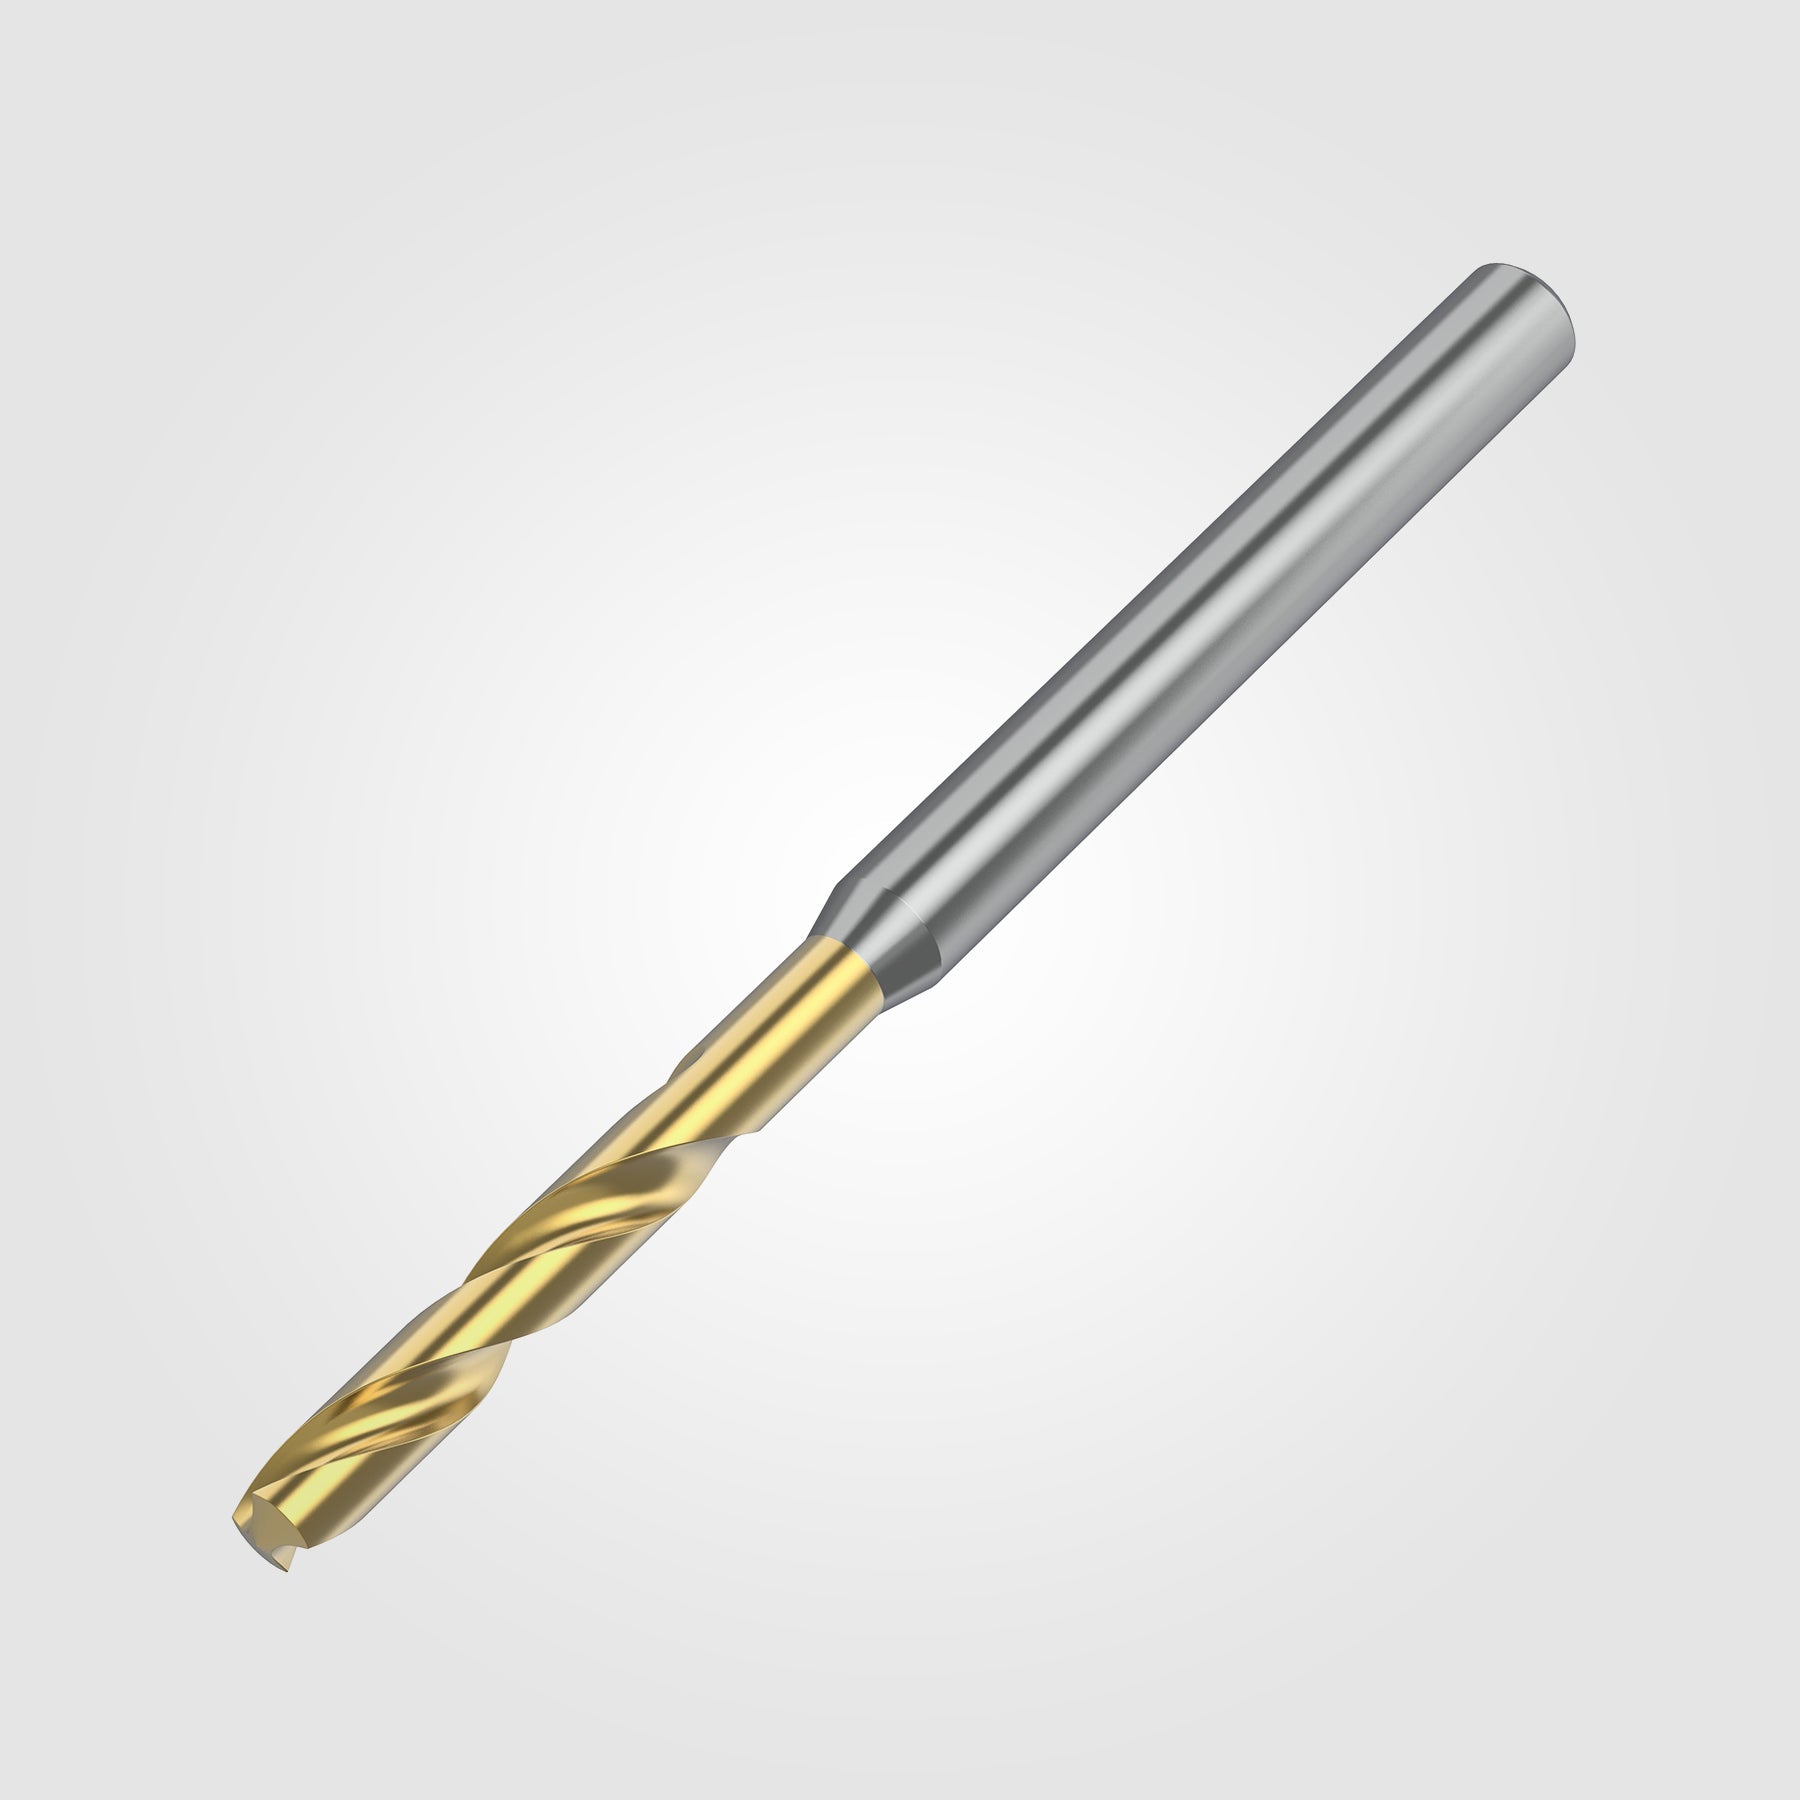 GOdrill (THROUGH COOLANT) | 10mm / .3937" / 5xD | SOLID CARBIDE DRILL | 4149110